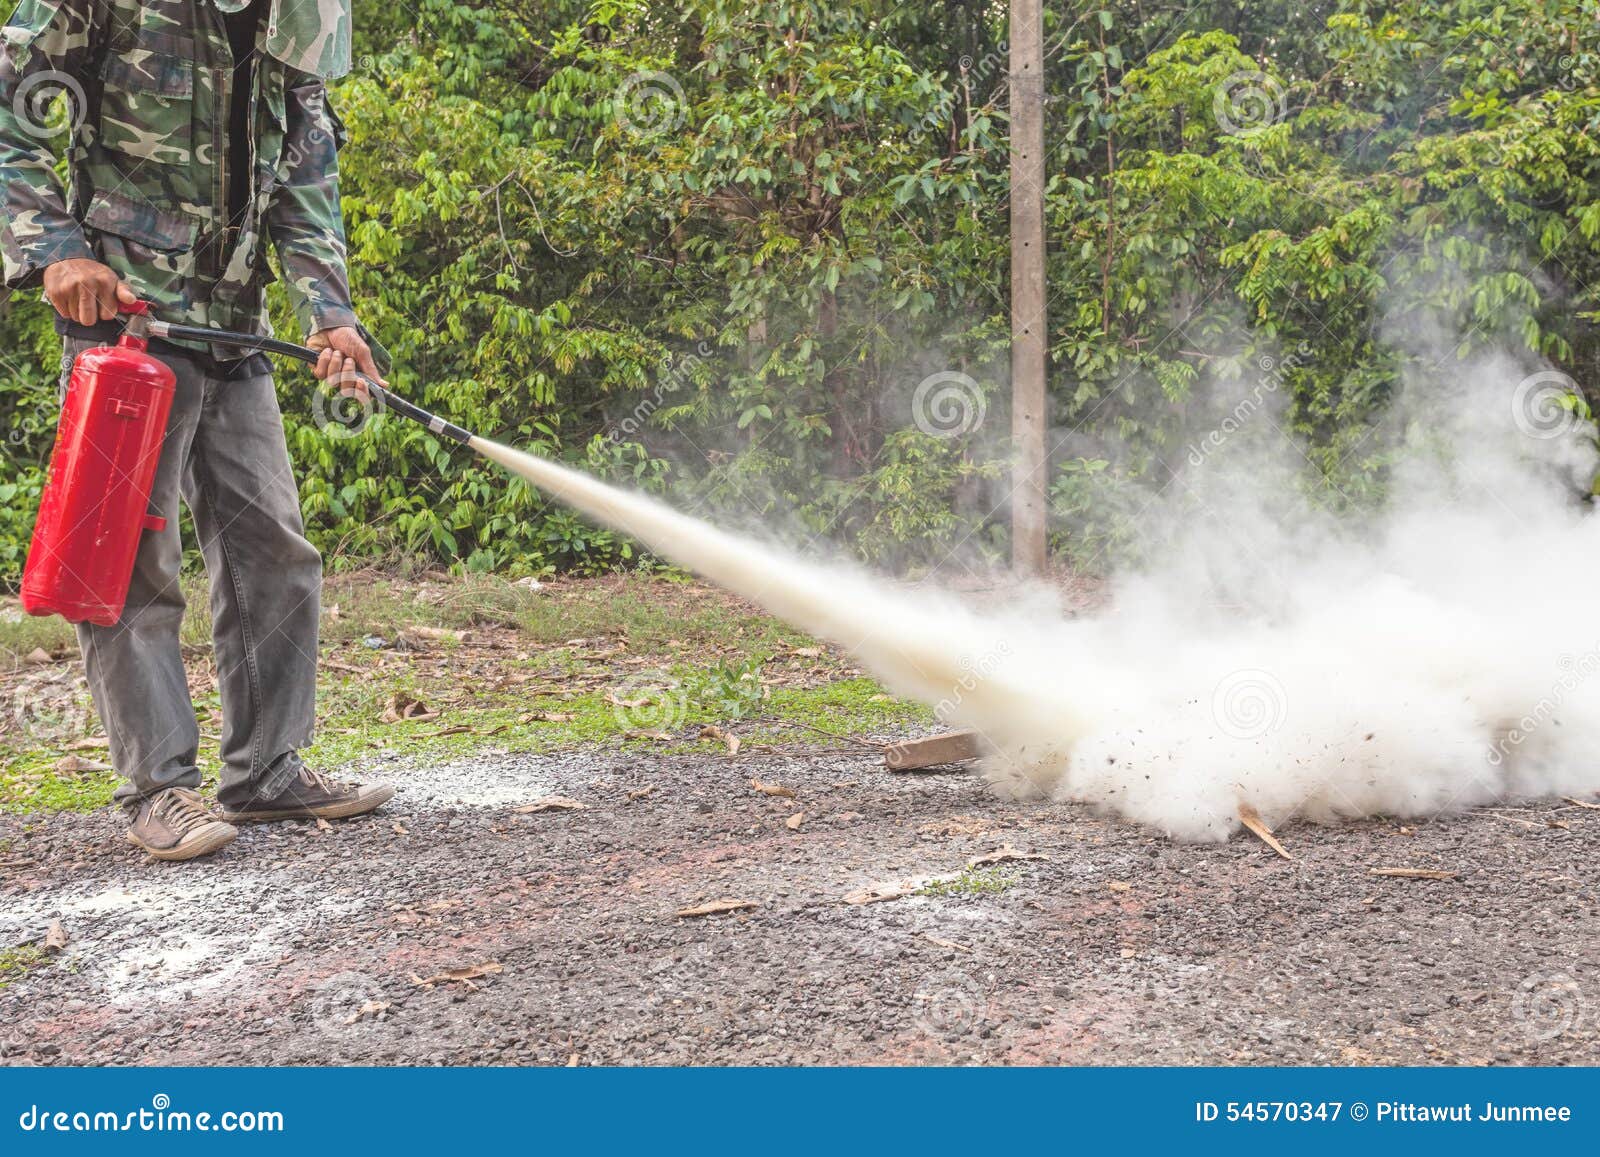 a man demonstrating how to use a fire extinguisher